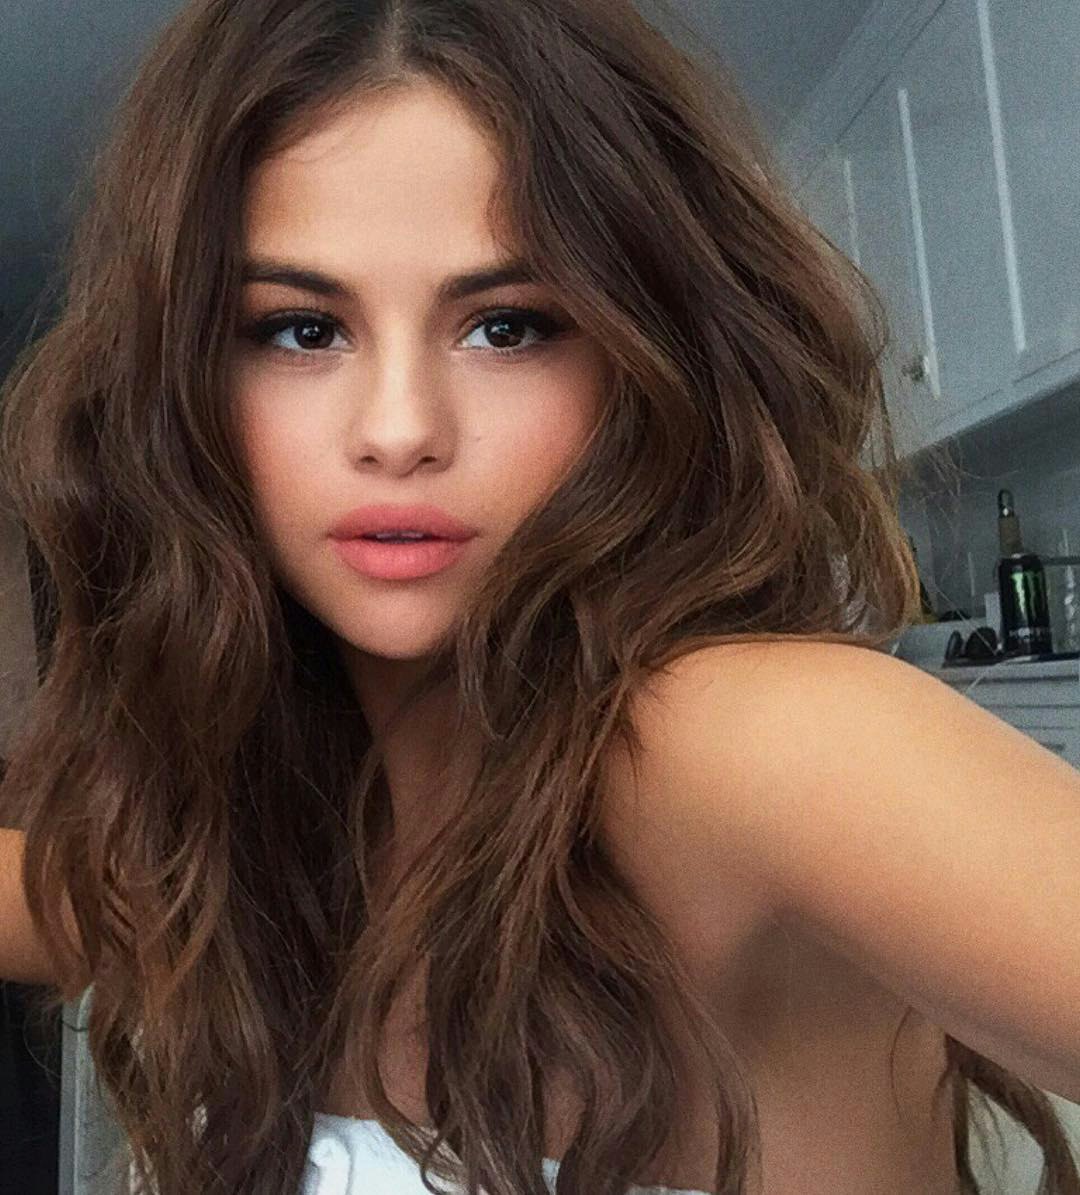 Selena Gomez Just Traded Her Curly Lob for Long Hair Extensions